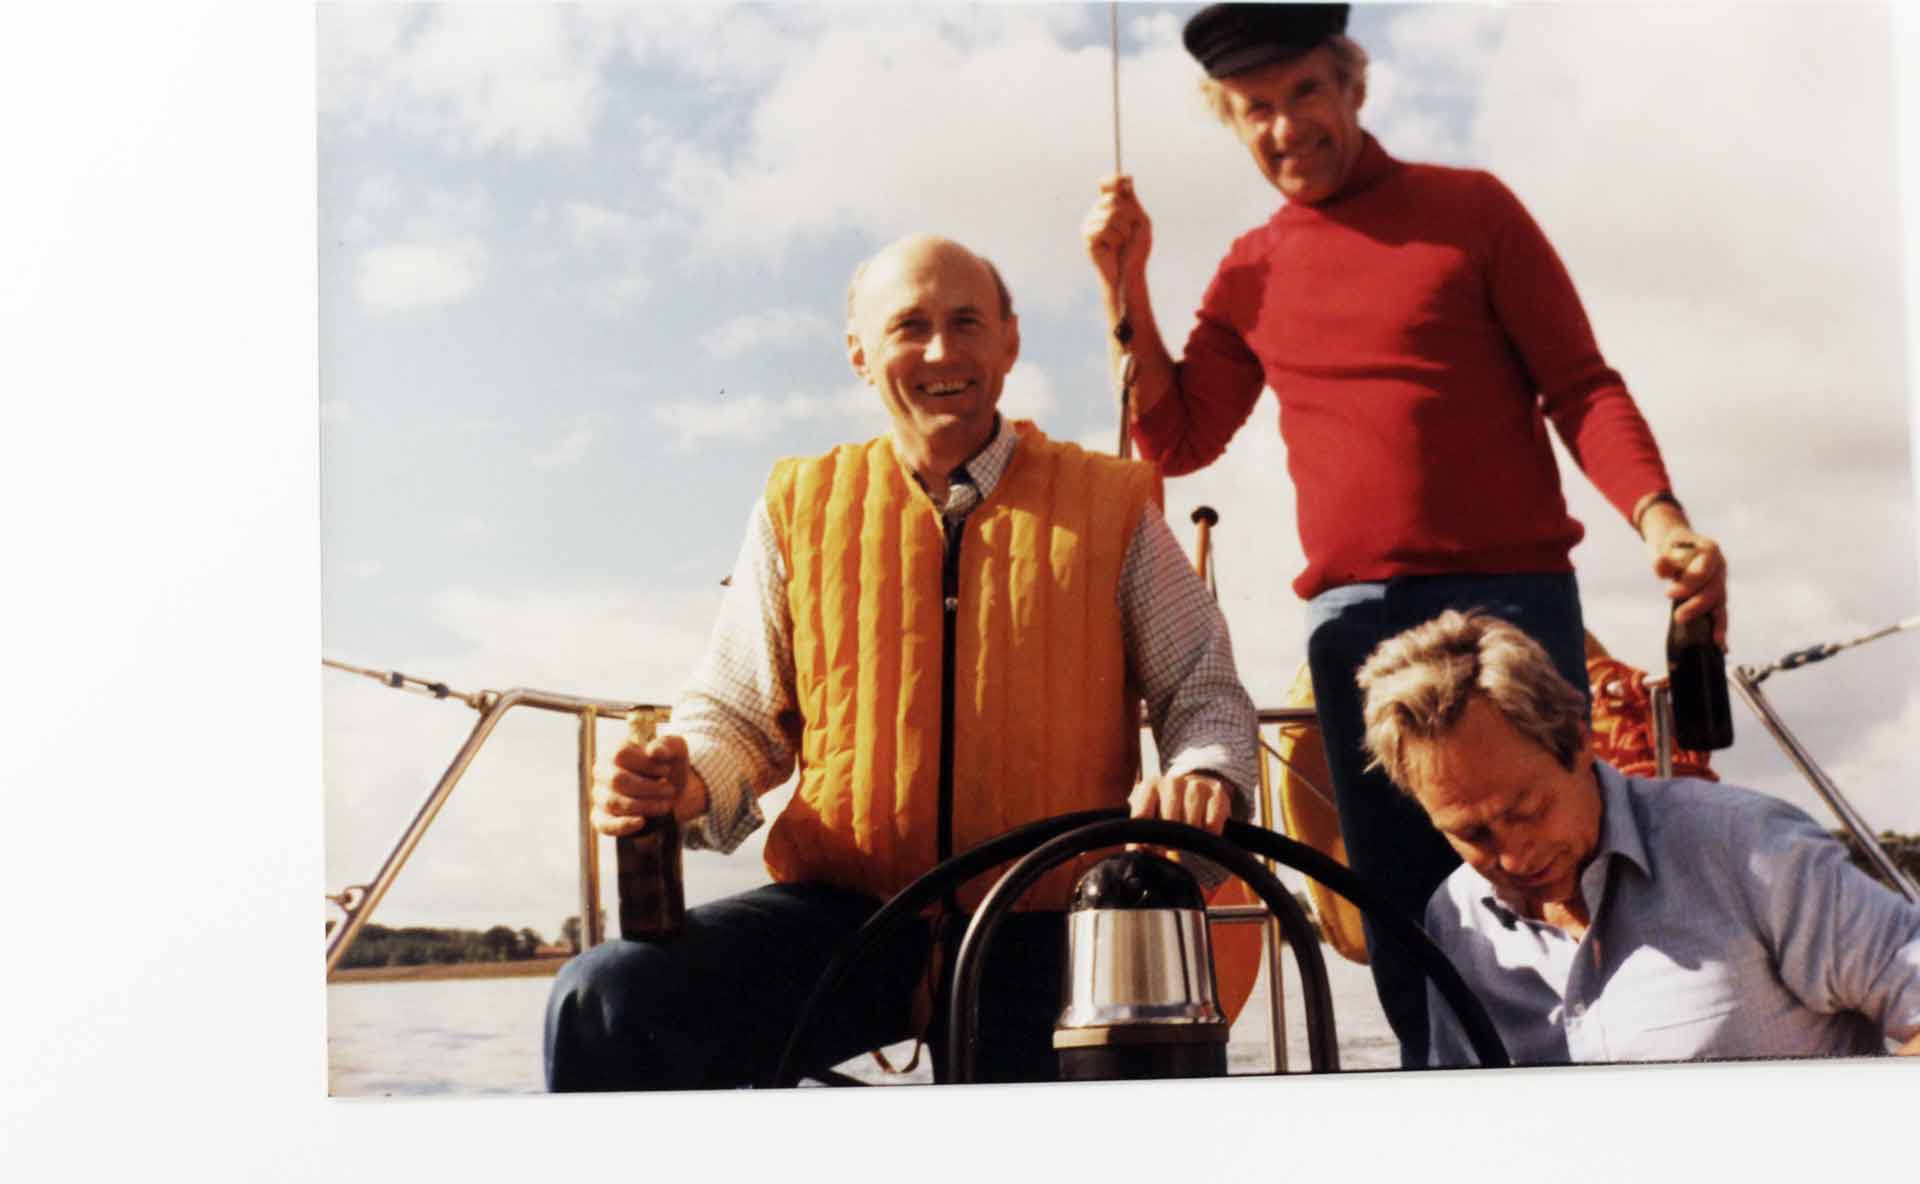 Her first owner (left) one one of his last "men only" cruises in the Eighties.